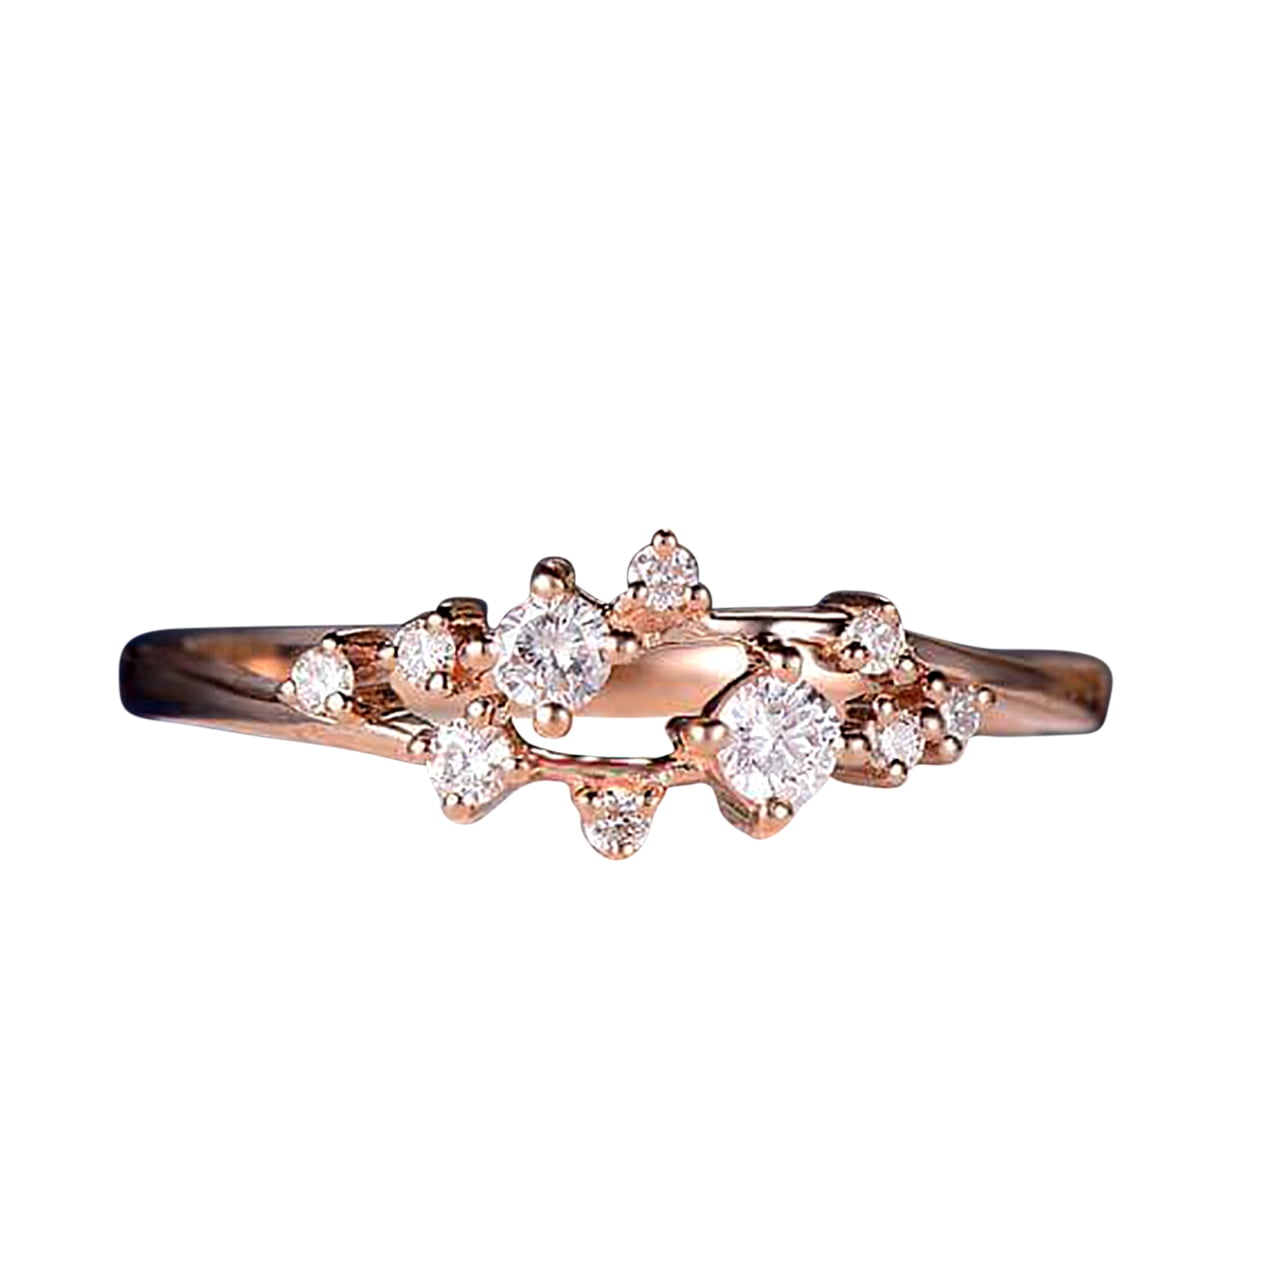 0.50 Carat Moissanite Cluster Ring Twig Engagement Ring Floral Unique Wedding Band Snowflake Design in Silver with 18k Rose Gold Plating